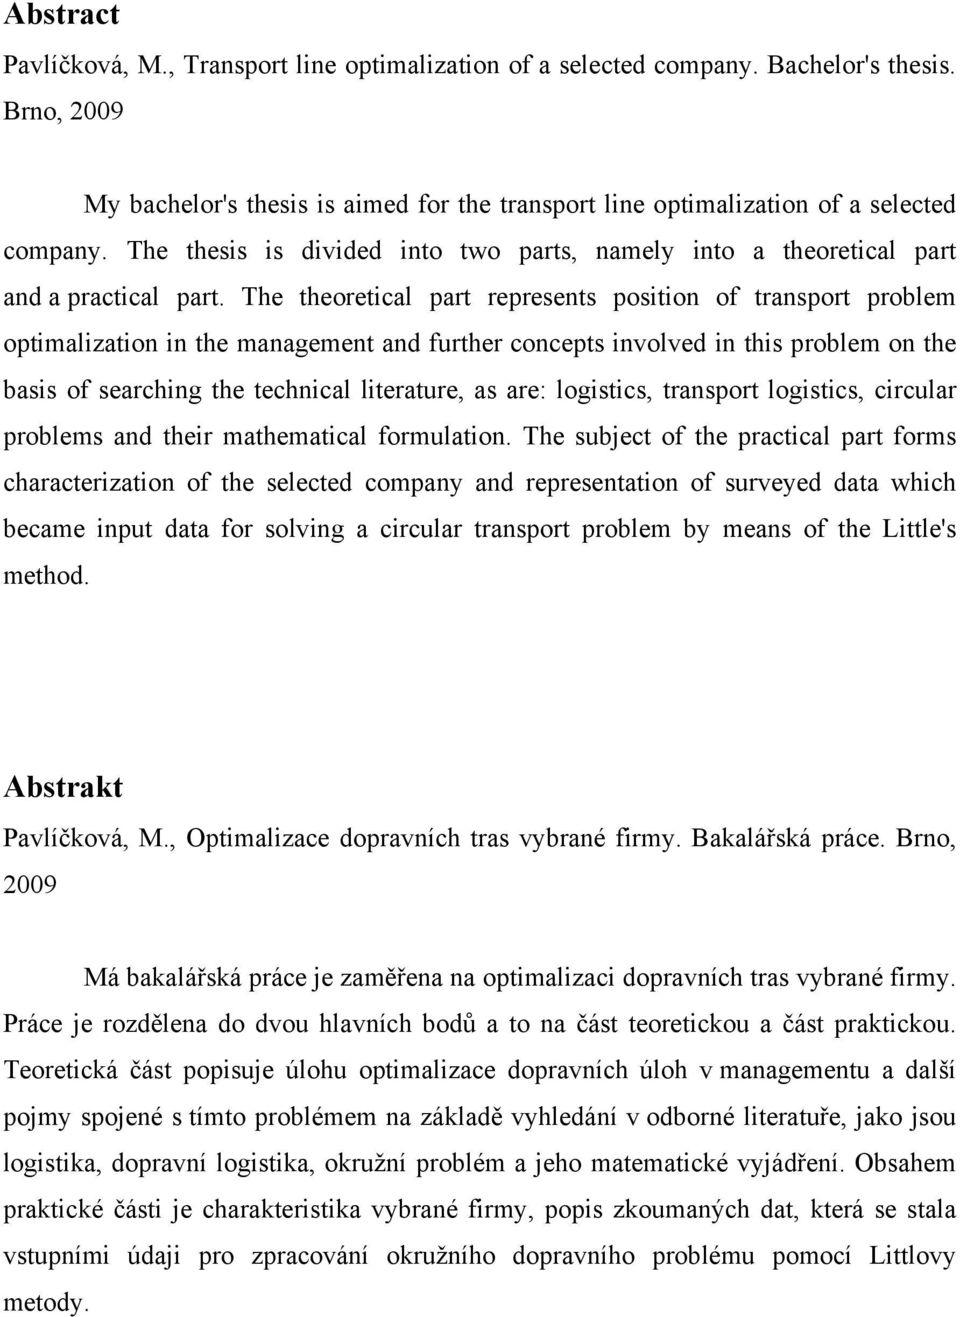 The theoretical part represents position of transport problem optimalization in the management and further concepts involved in this problem on the basis of searching the technical literature, as